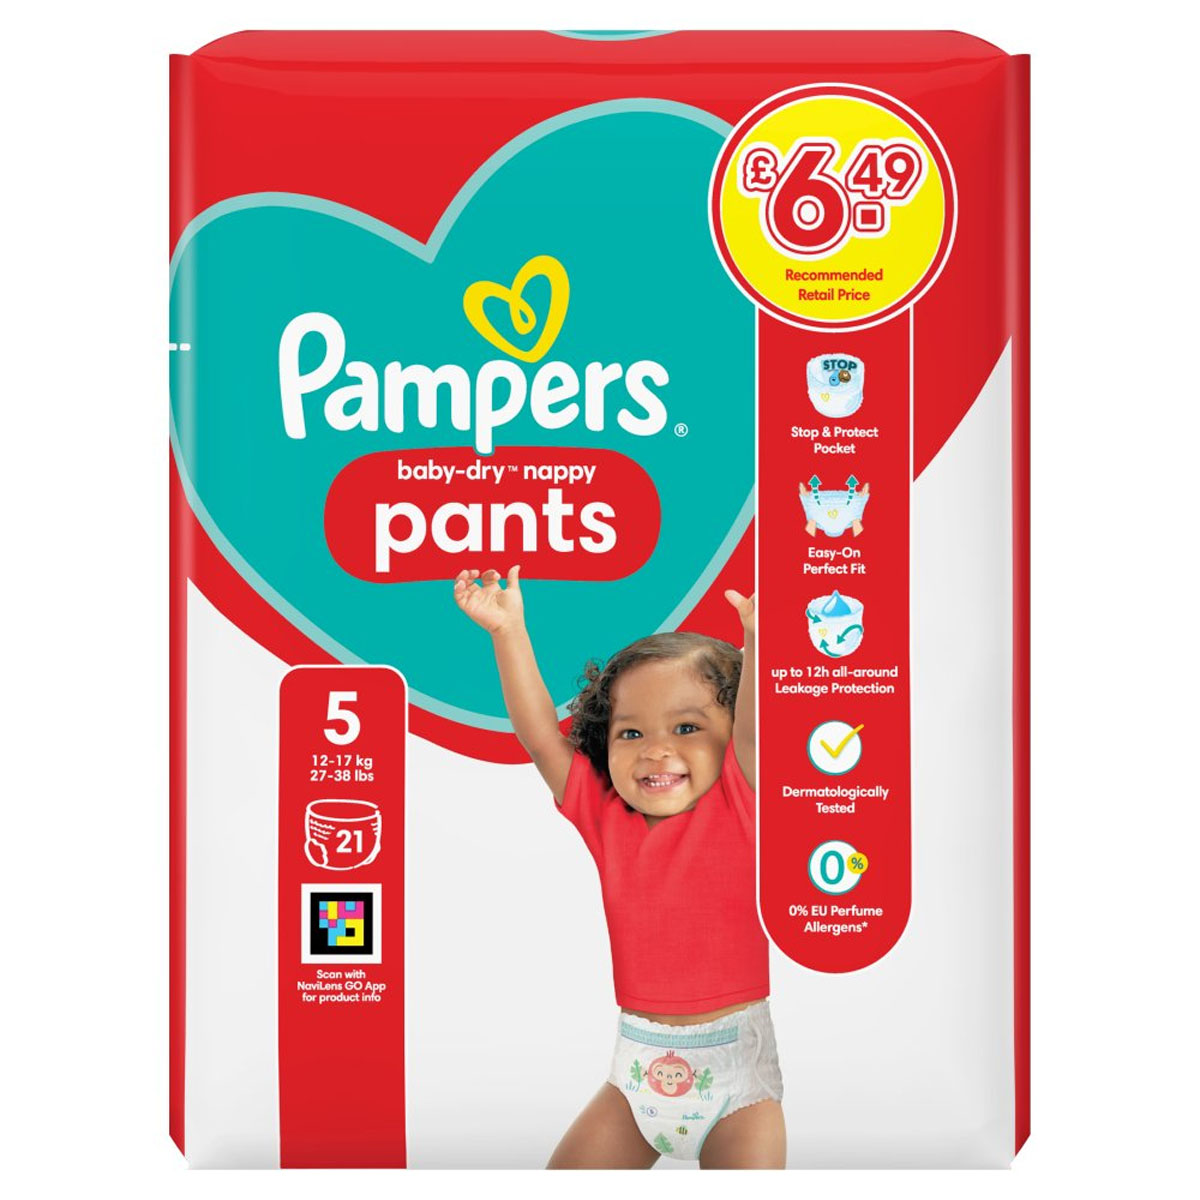 Pampers - Baby-Dry Nappy Pants Size 5, 21 Nappies, - 12kg baby pants size 5.